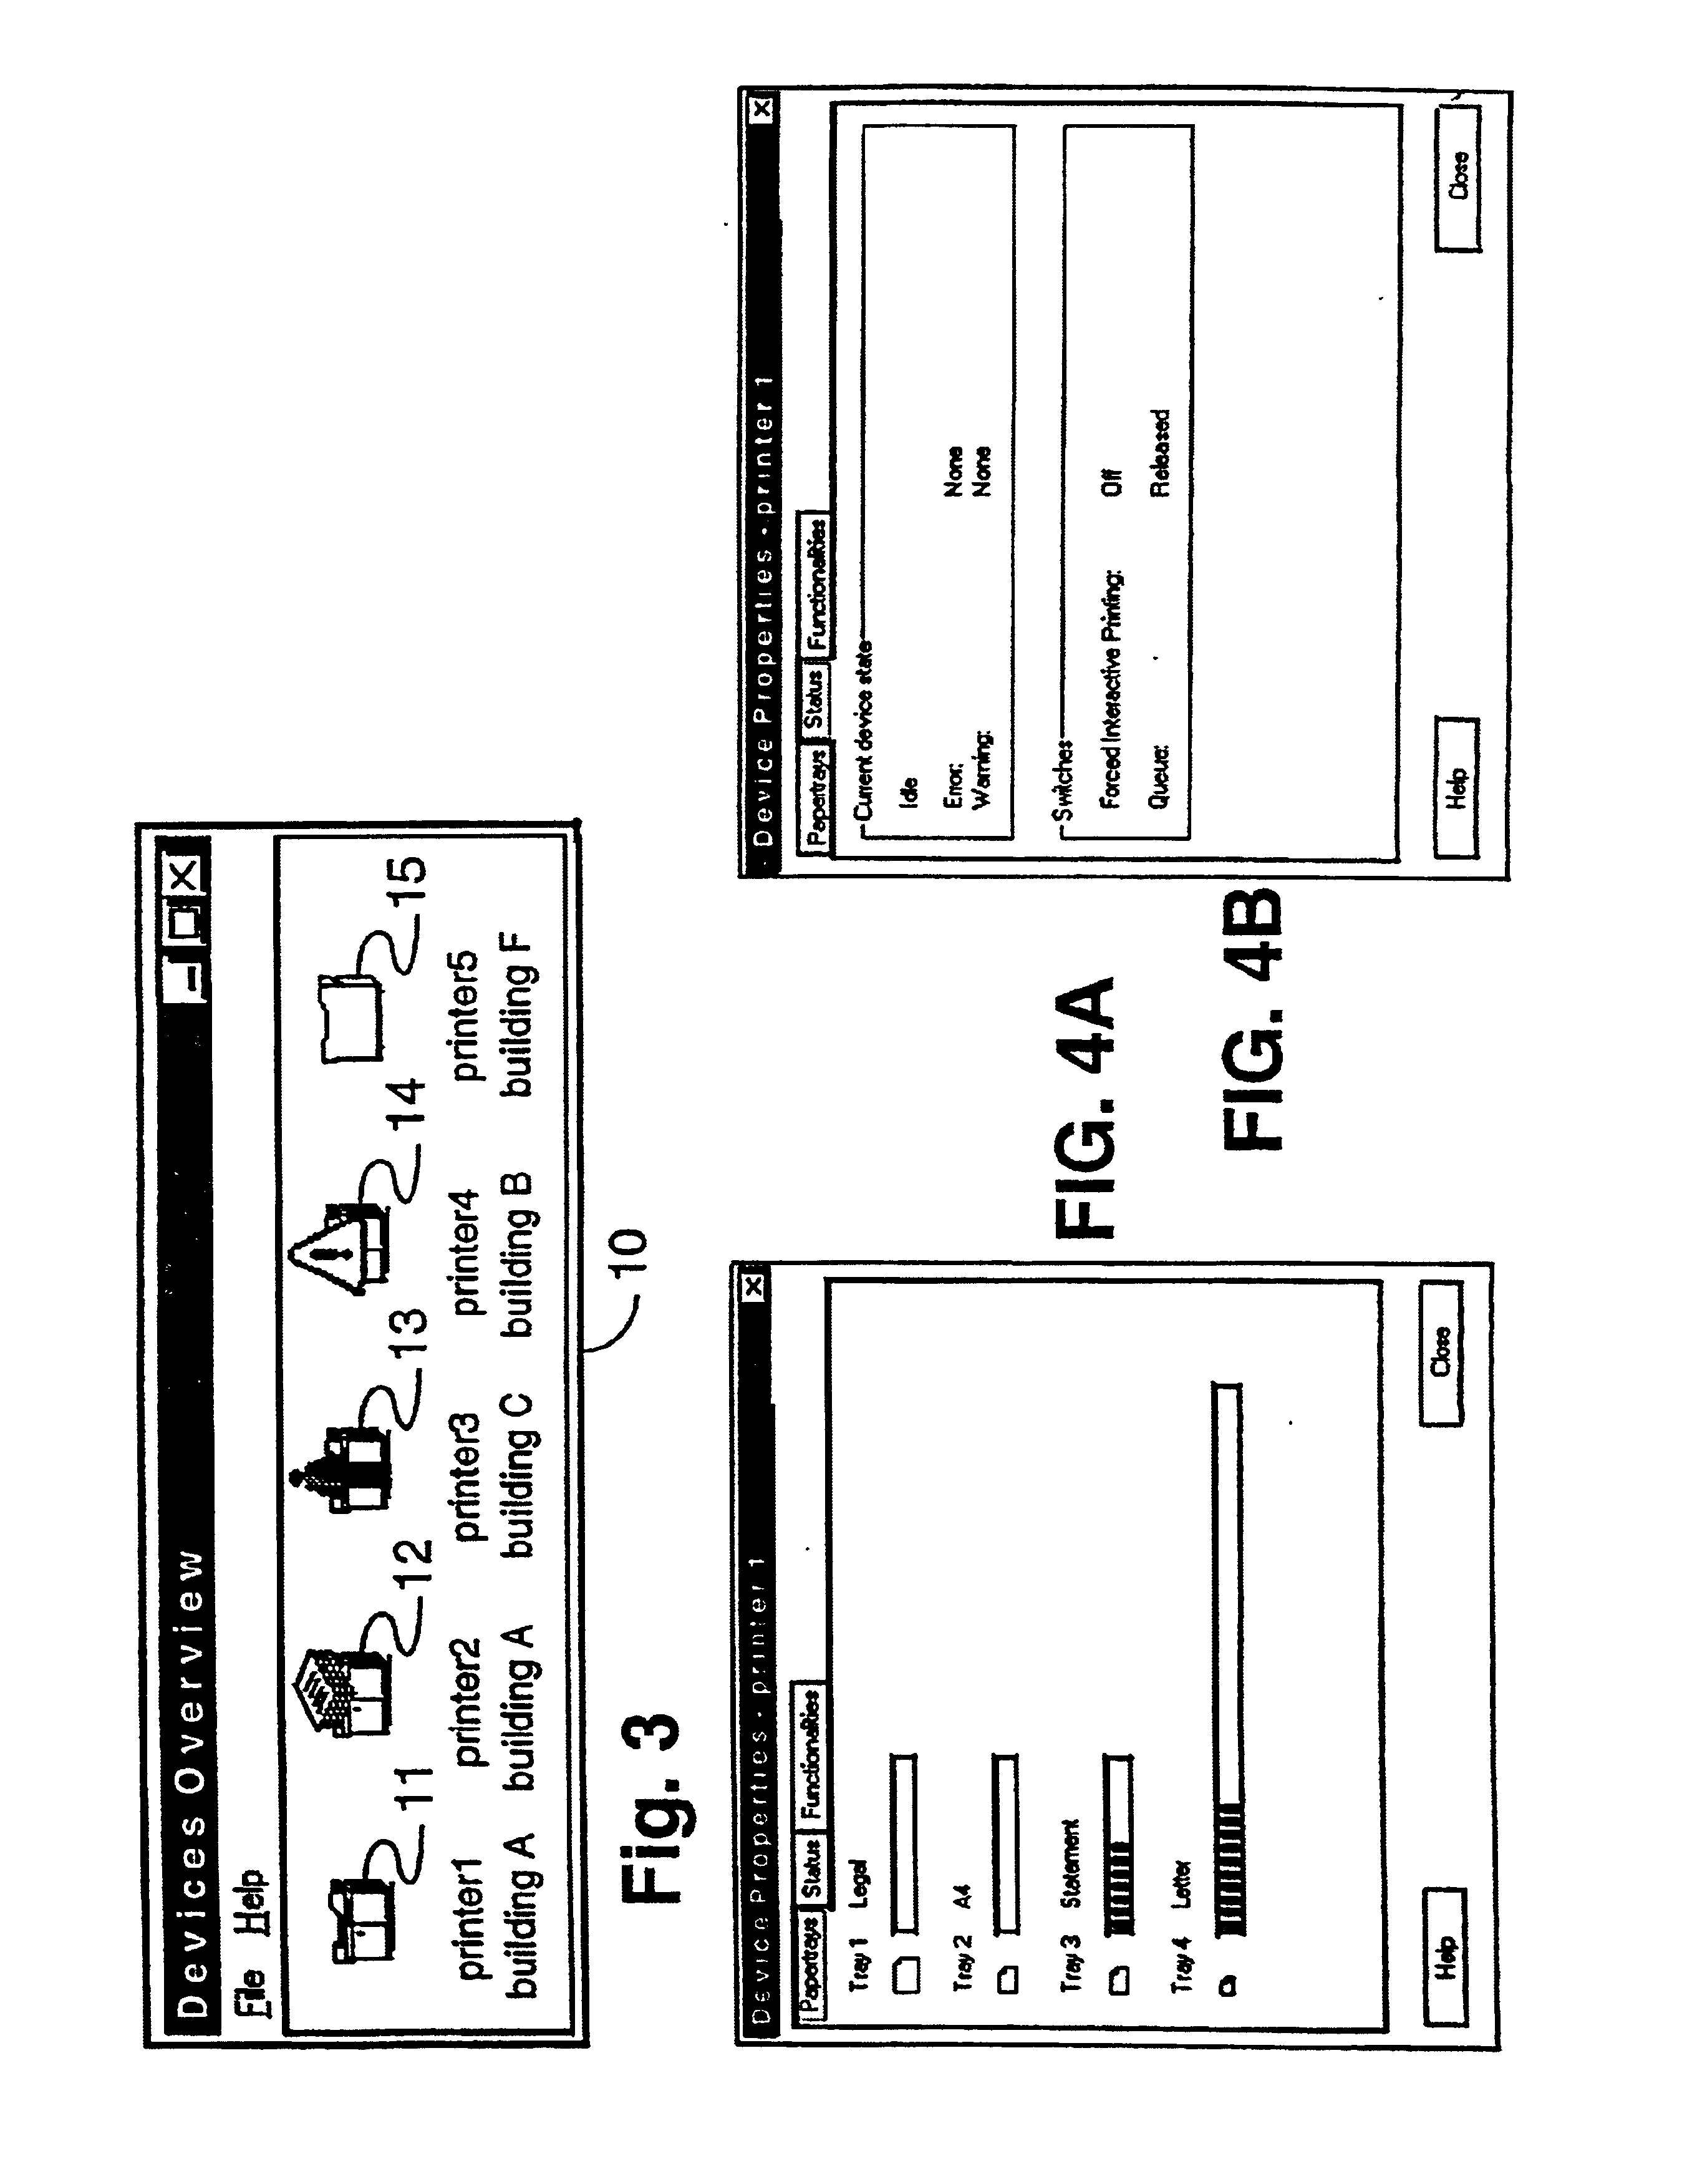 User interface for an information-processing system